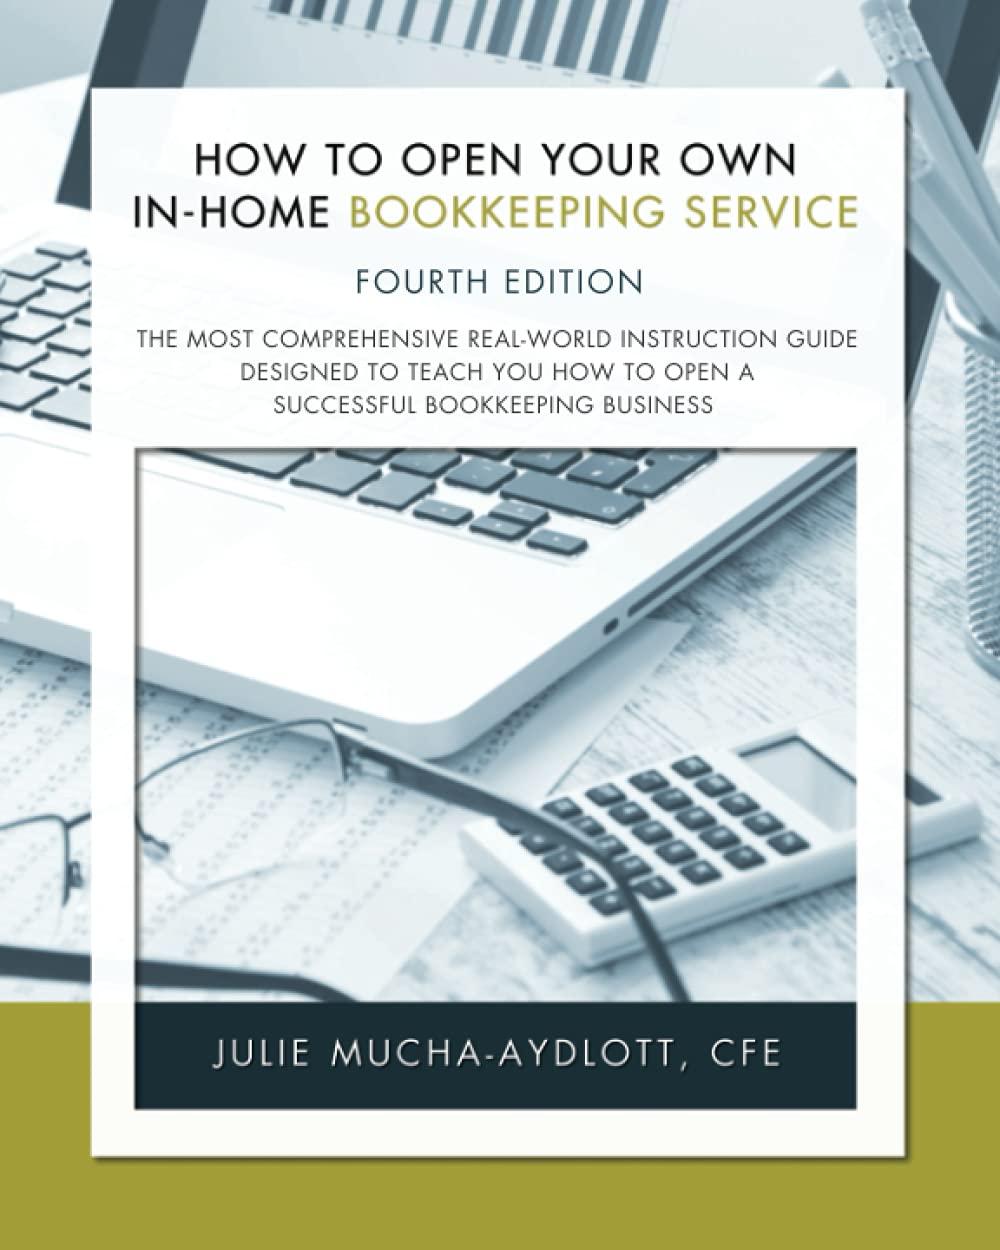 how to open your own in-home bookkeeping service 4th edition julie mucha-aydlott 0979412471, 978-0979412479